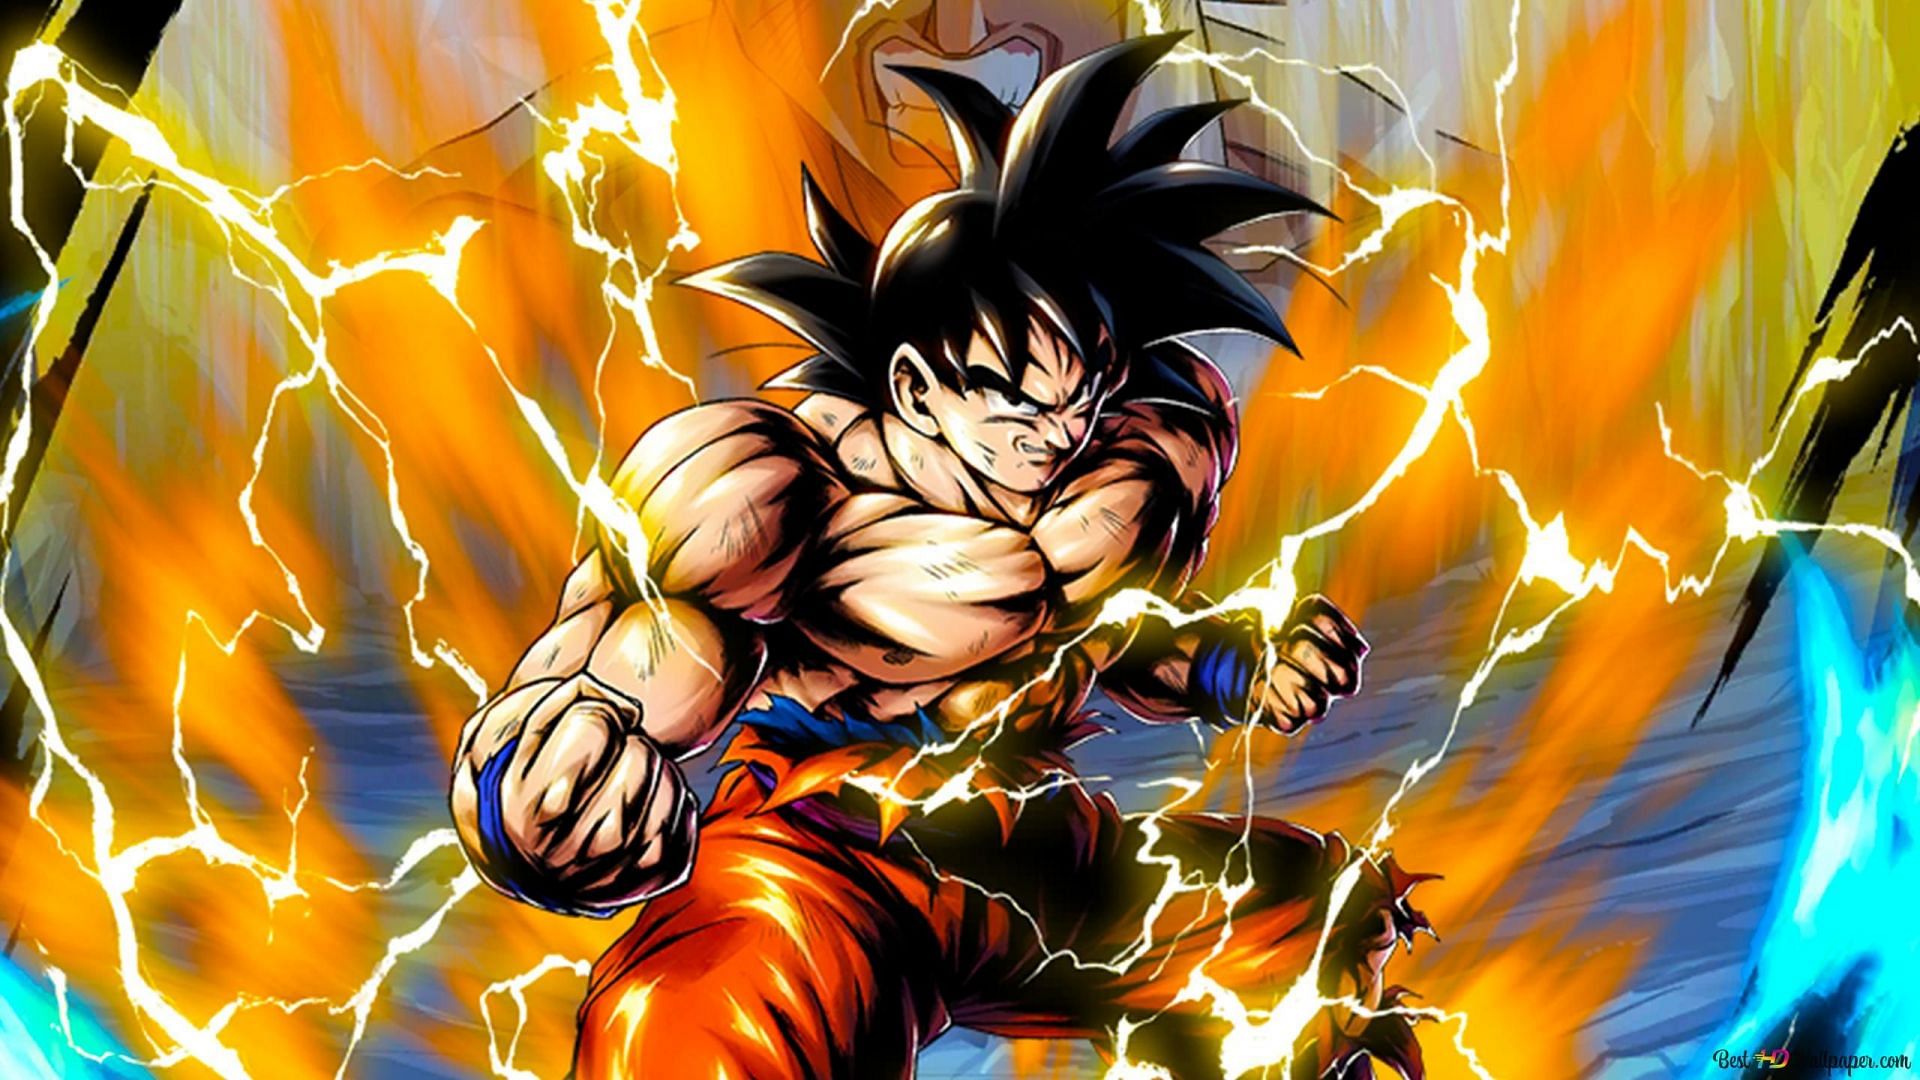 Dragon Ball Legends: 10 Characters That Need To Be In The Game